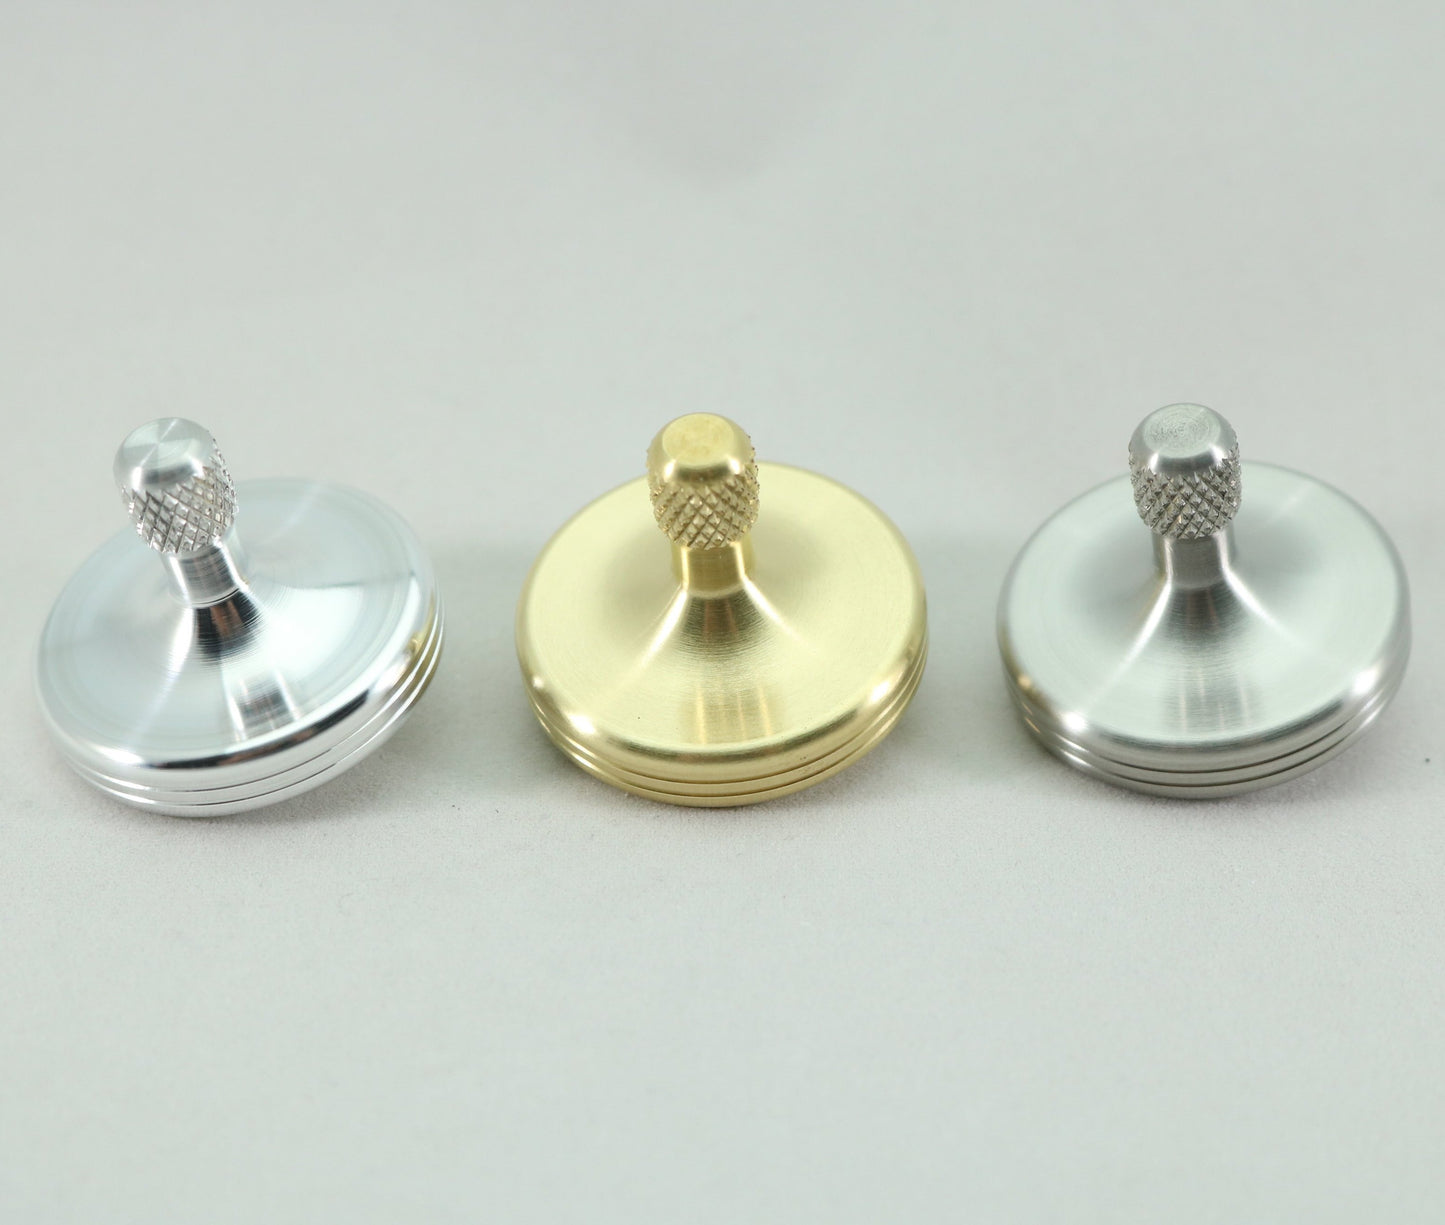 The S2 basic metals collection shown from left to right in aluminum, brass and stainless steel